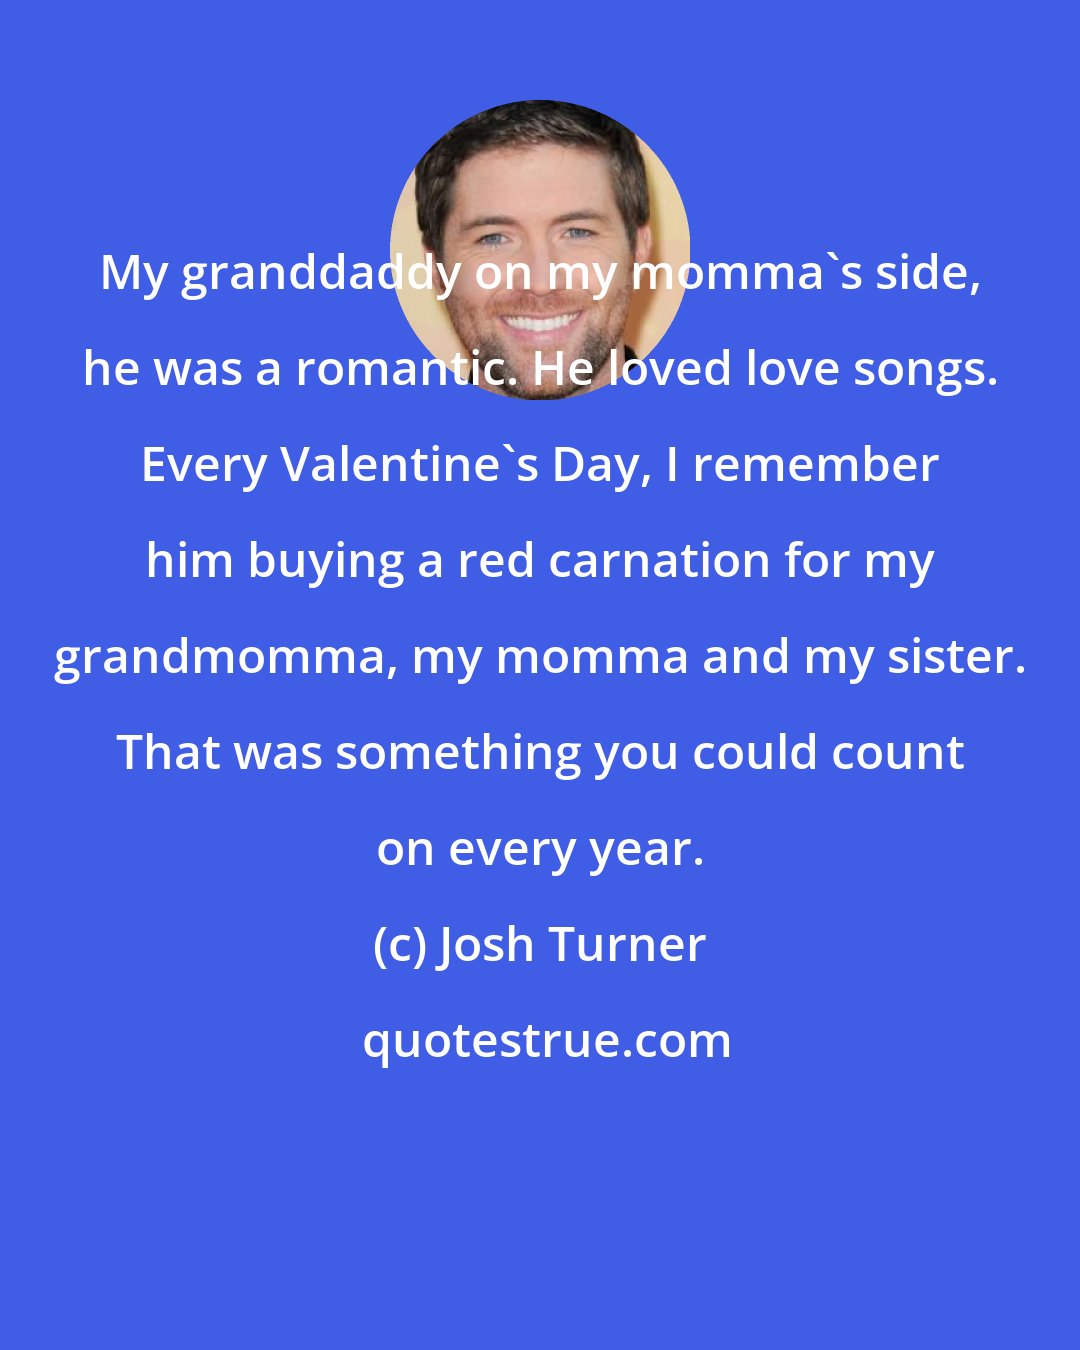 Josh Turner: My granddaddy on my momma's side, he was a romantic. He loved love songs. Every Valentine's Day, I remember him buying a red carnation for my grandmomma, my momma and my sister. That was something you could count on every year.